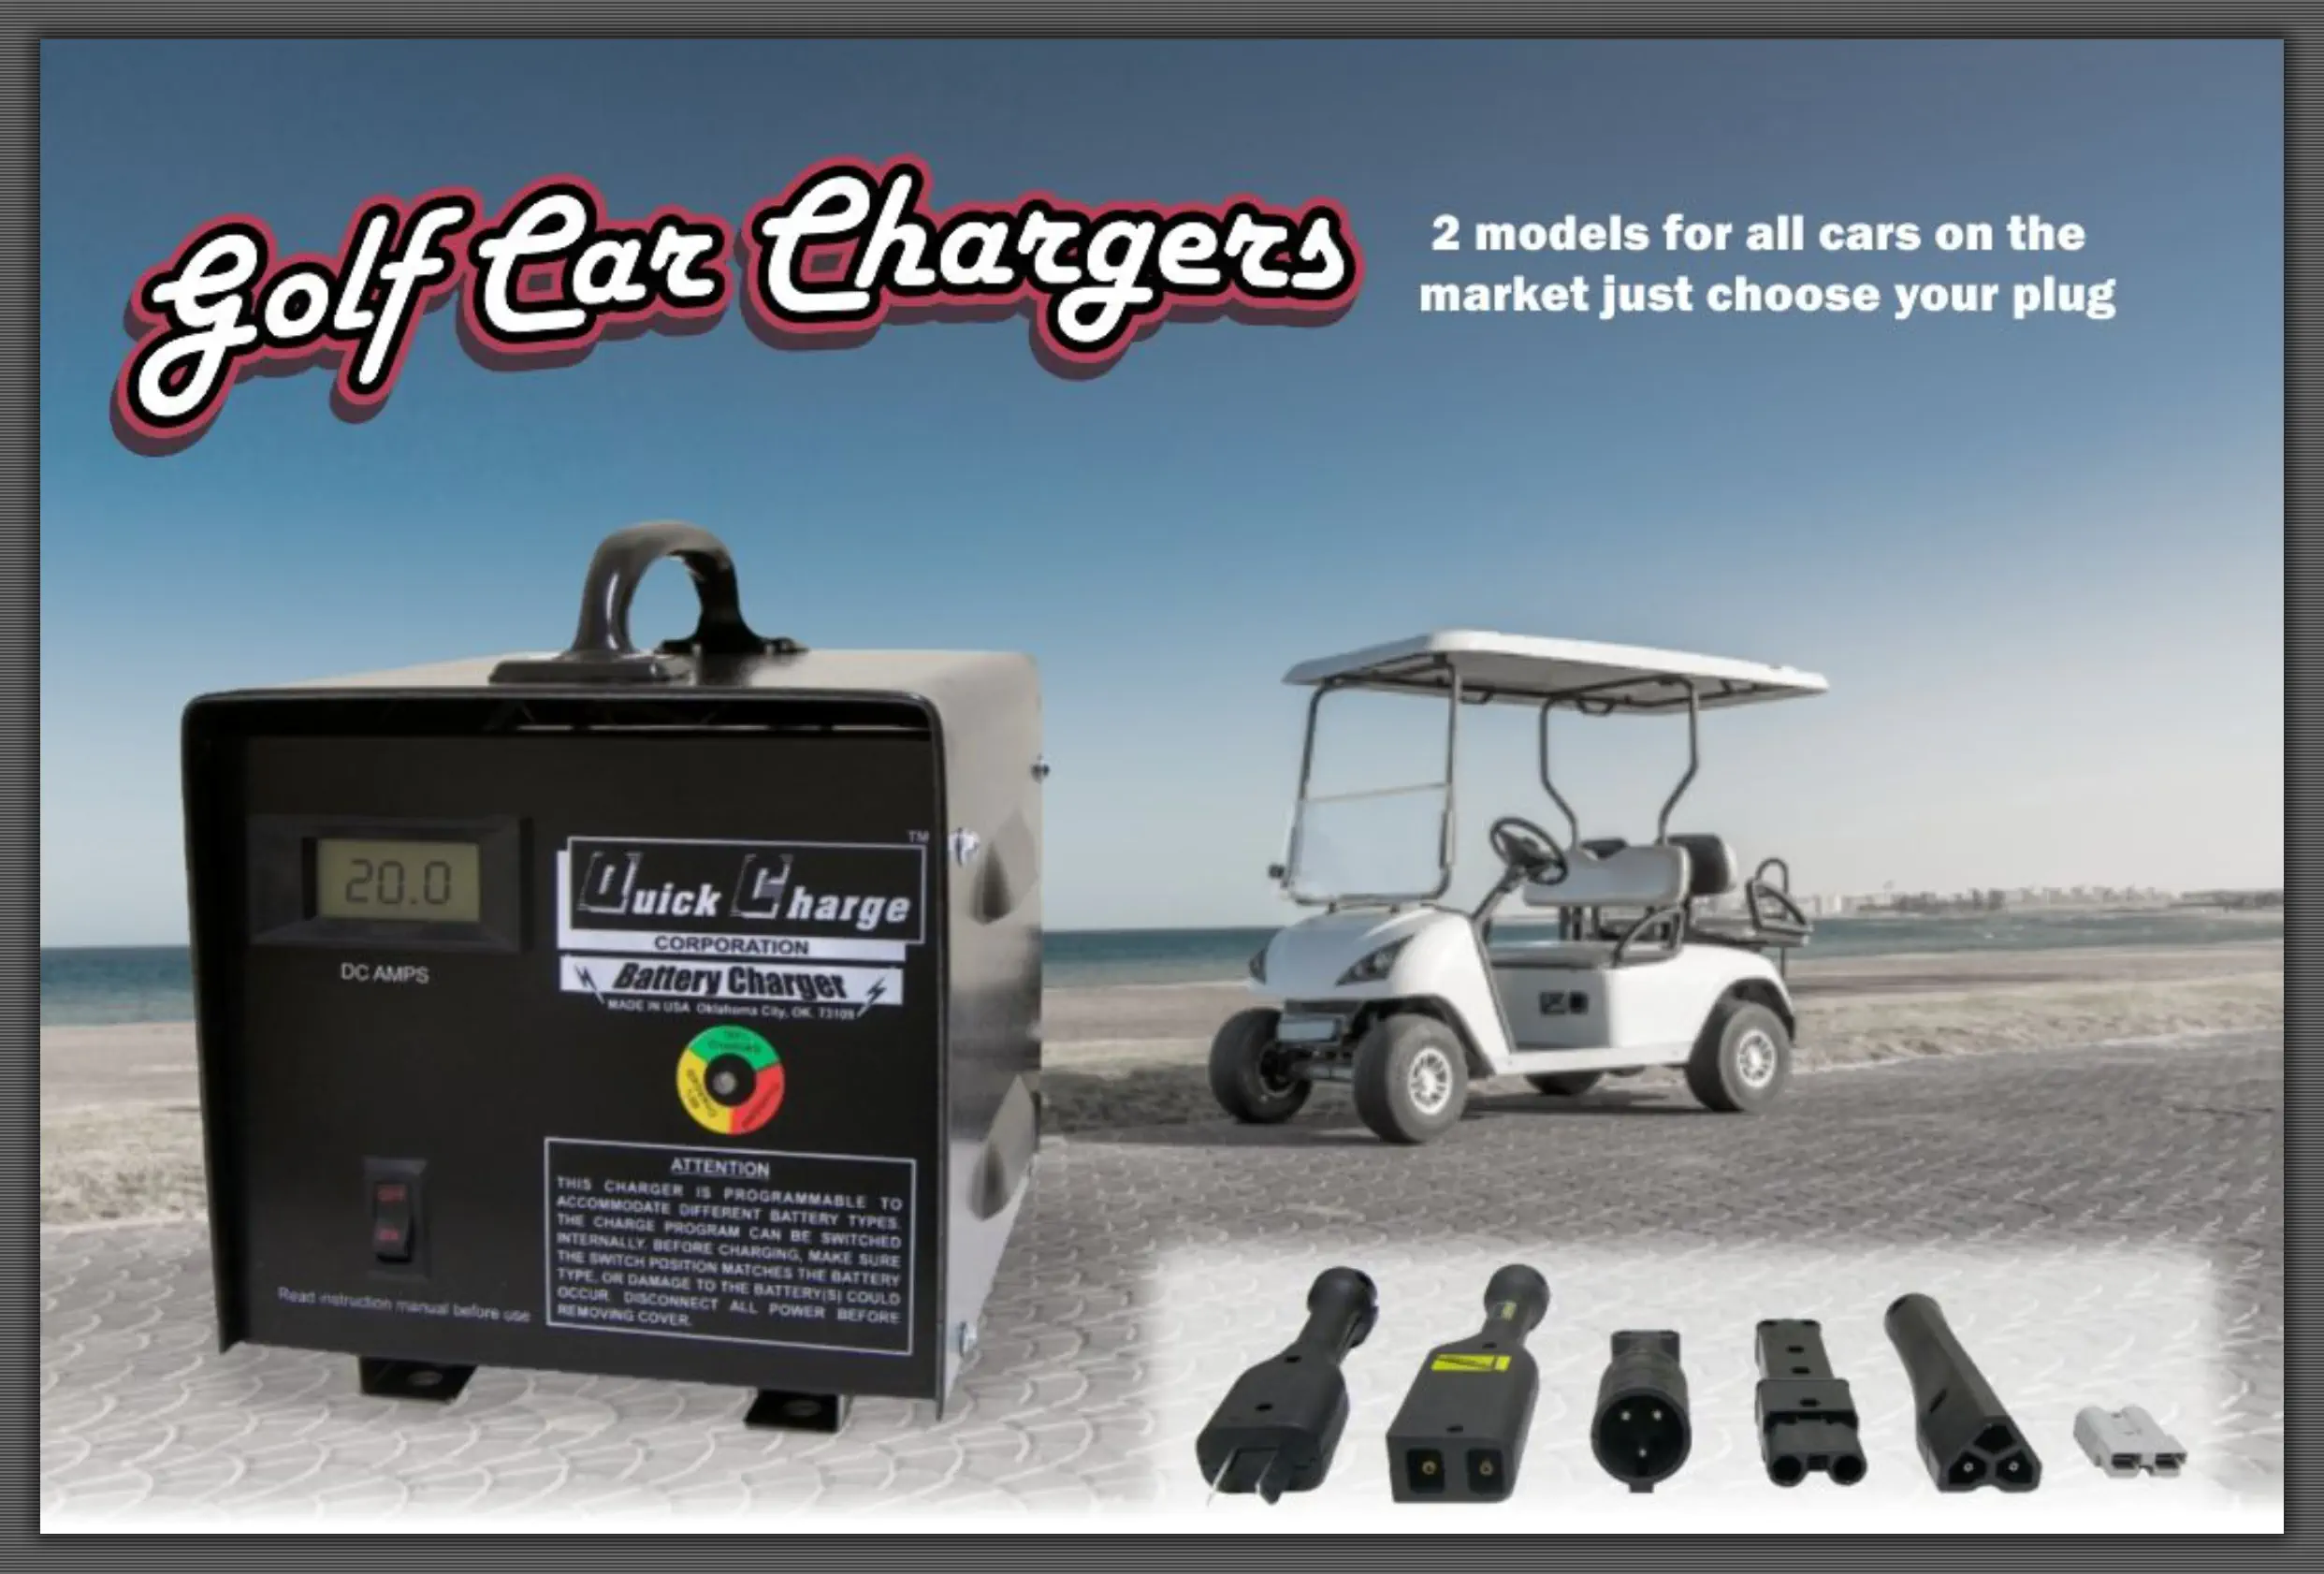 Golf car chargers